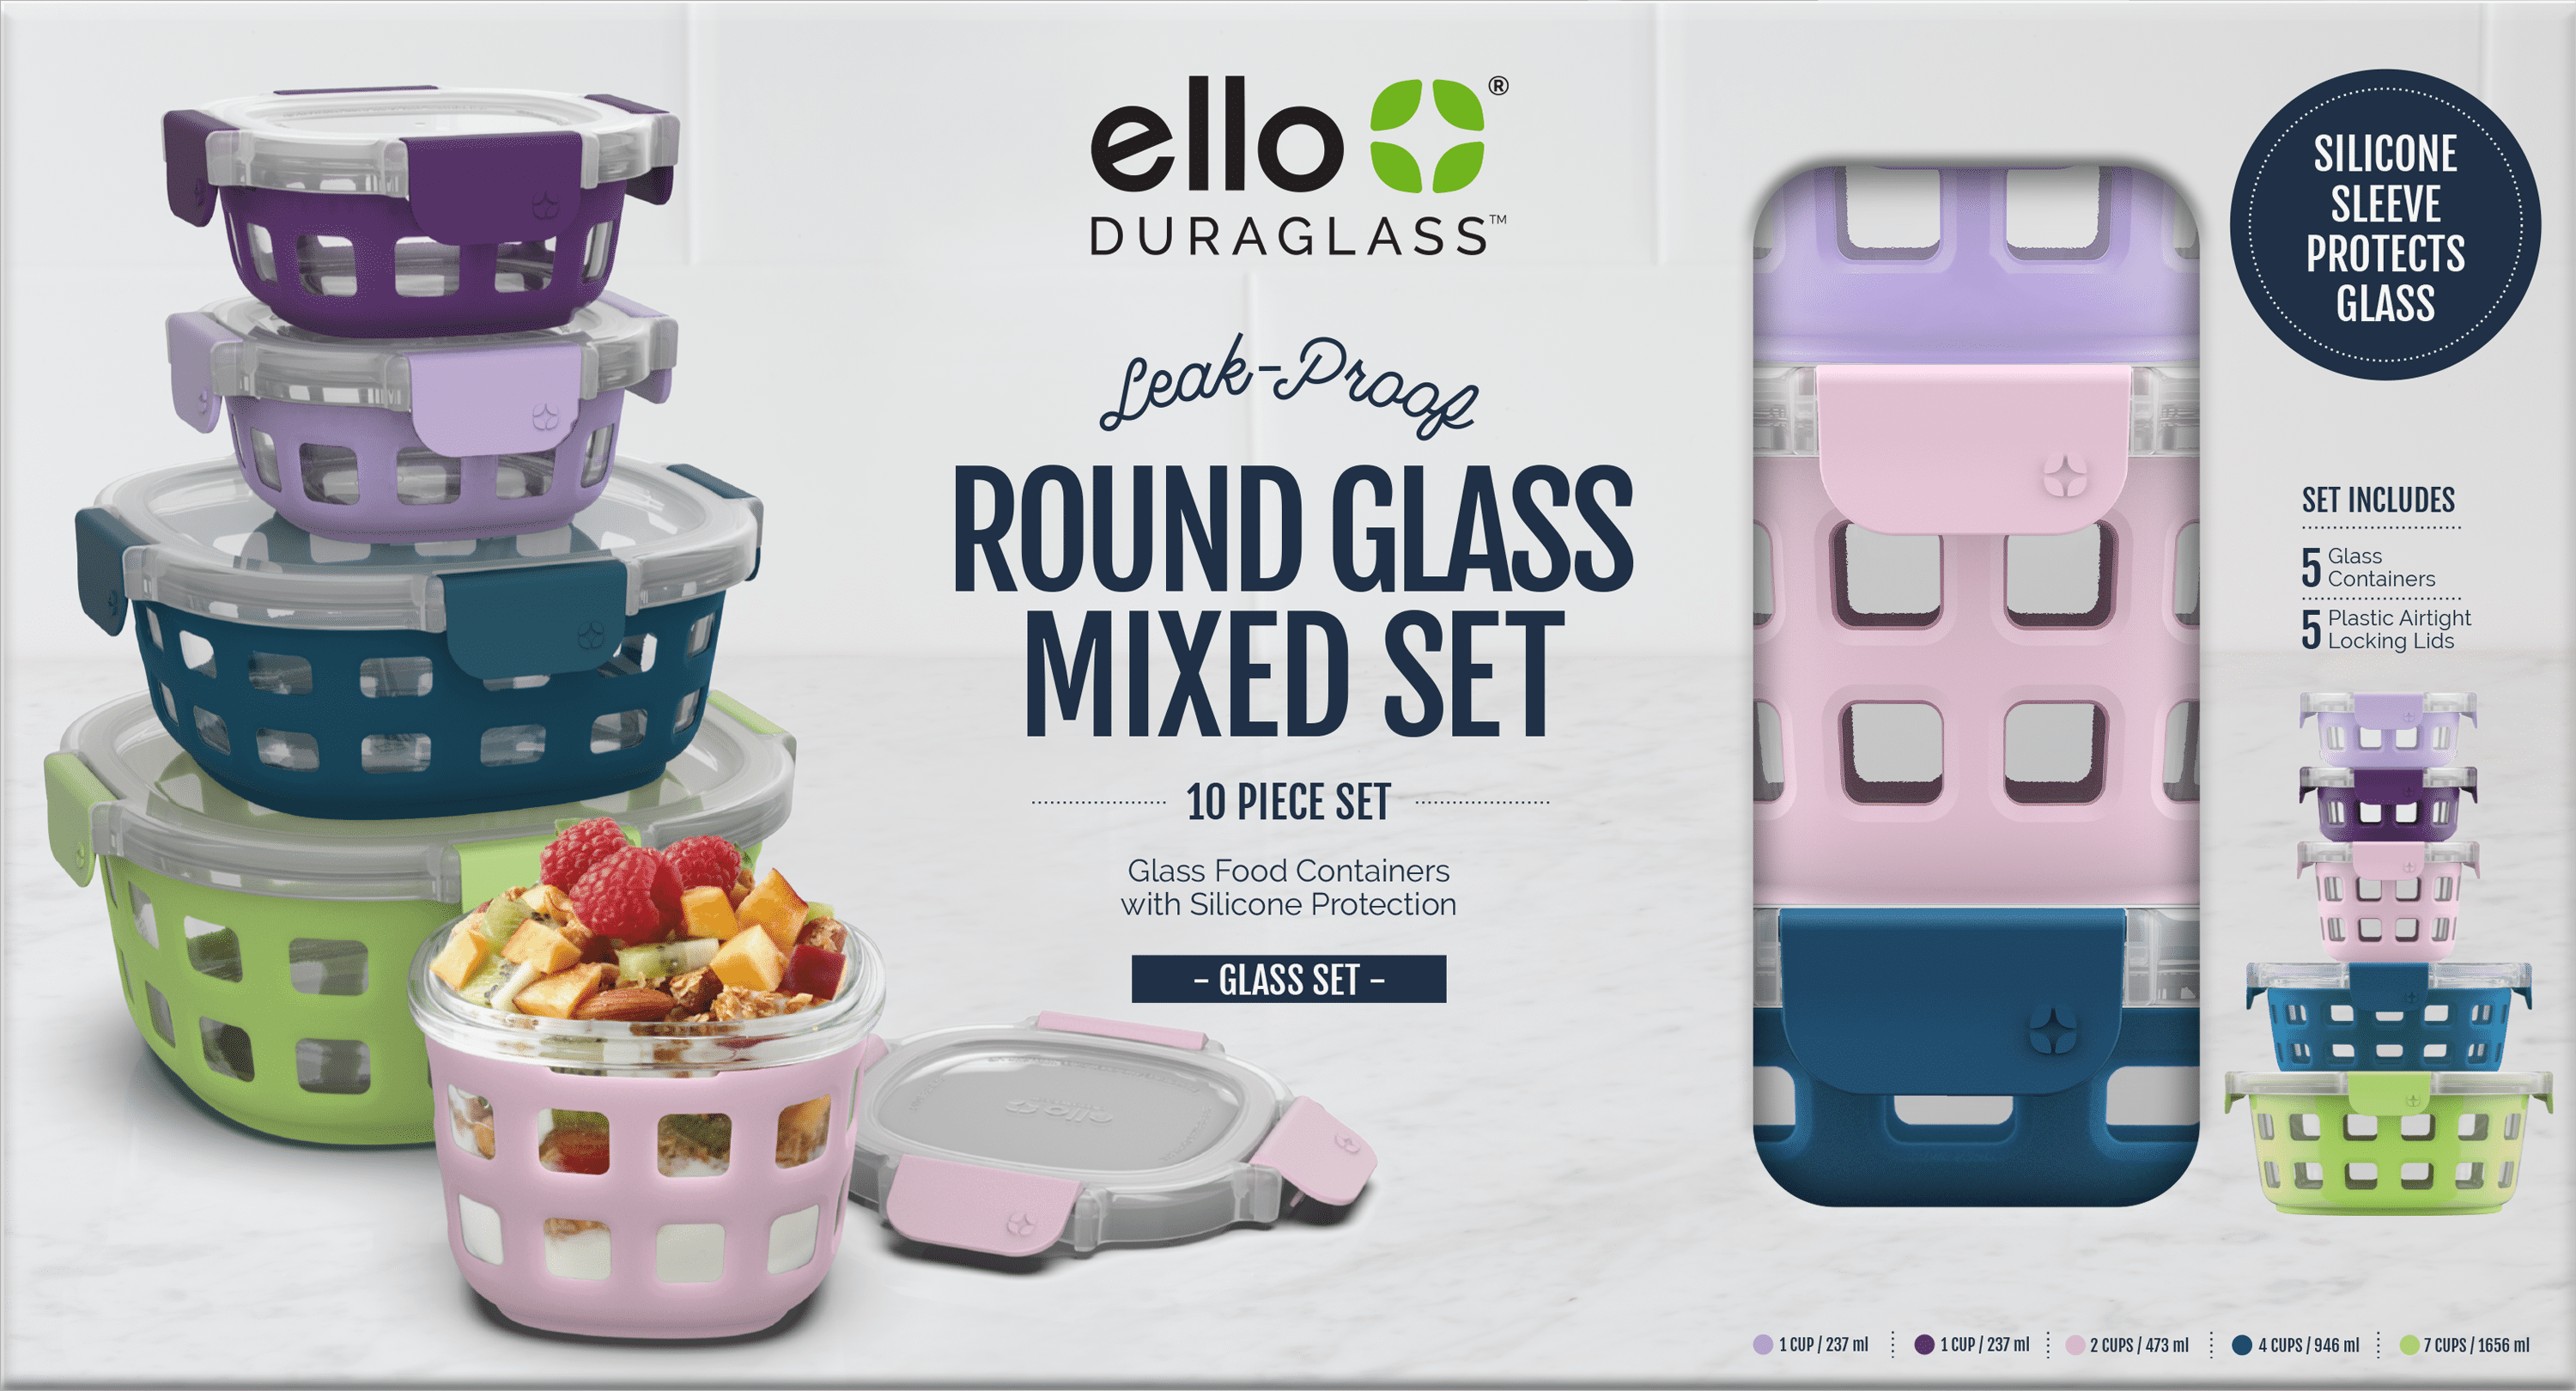  Ello Duraglass Round Glass Meal Prep Storage Containers Set, 10  Pc 3.4 Cup/ 800ml, Melon & Duraglass Glass Food Storage Mixed Set - Glass  Food Storage Bowls, 10 Piece 5 Pack